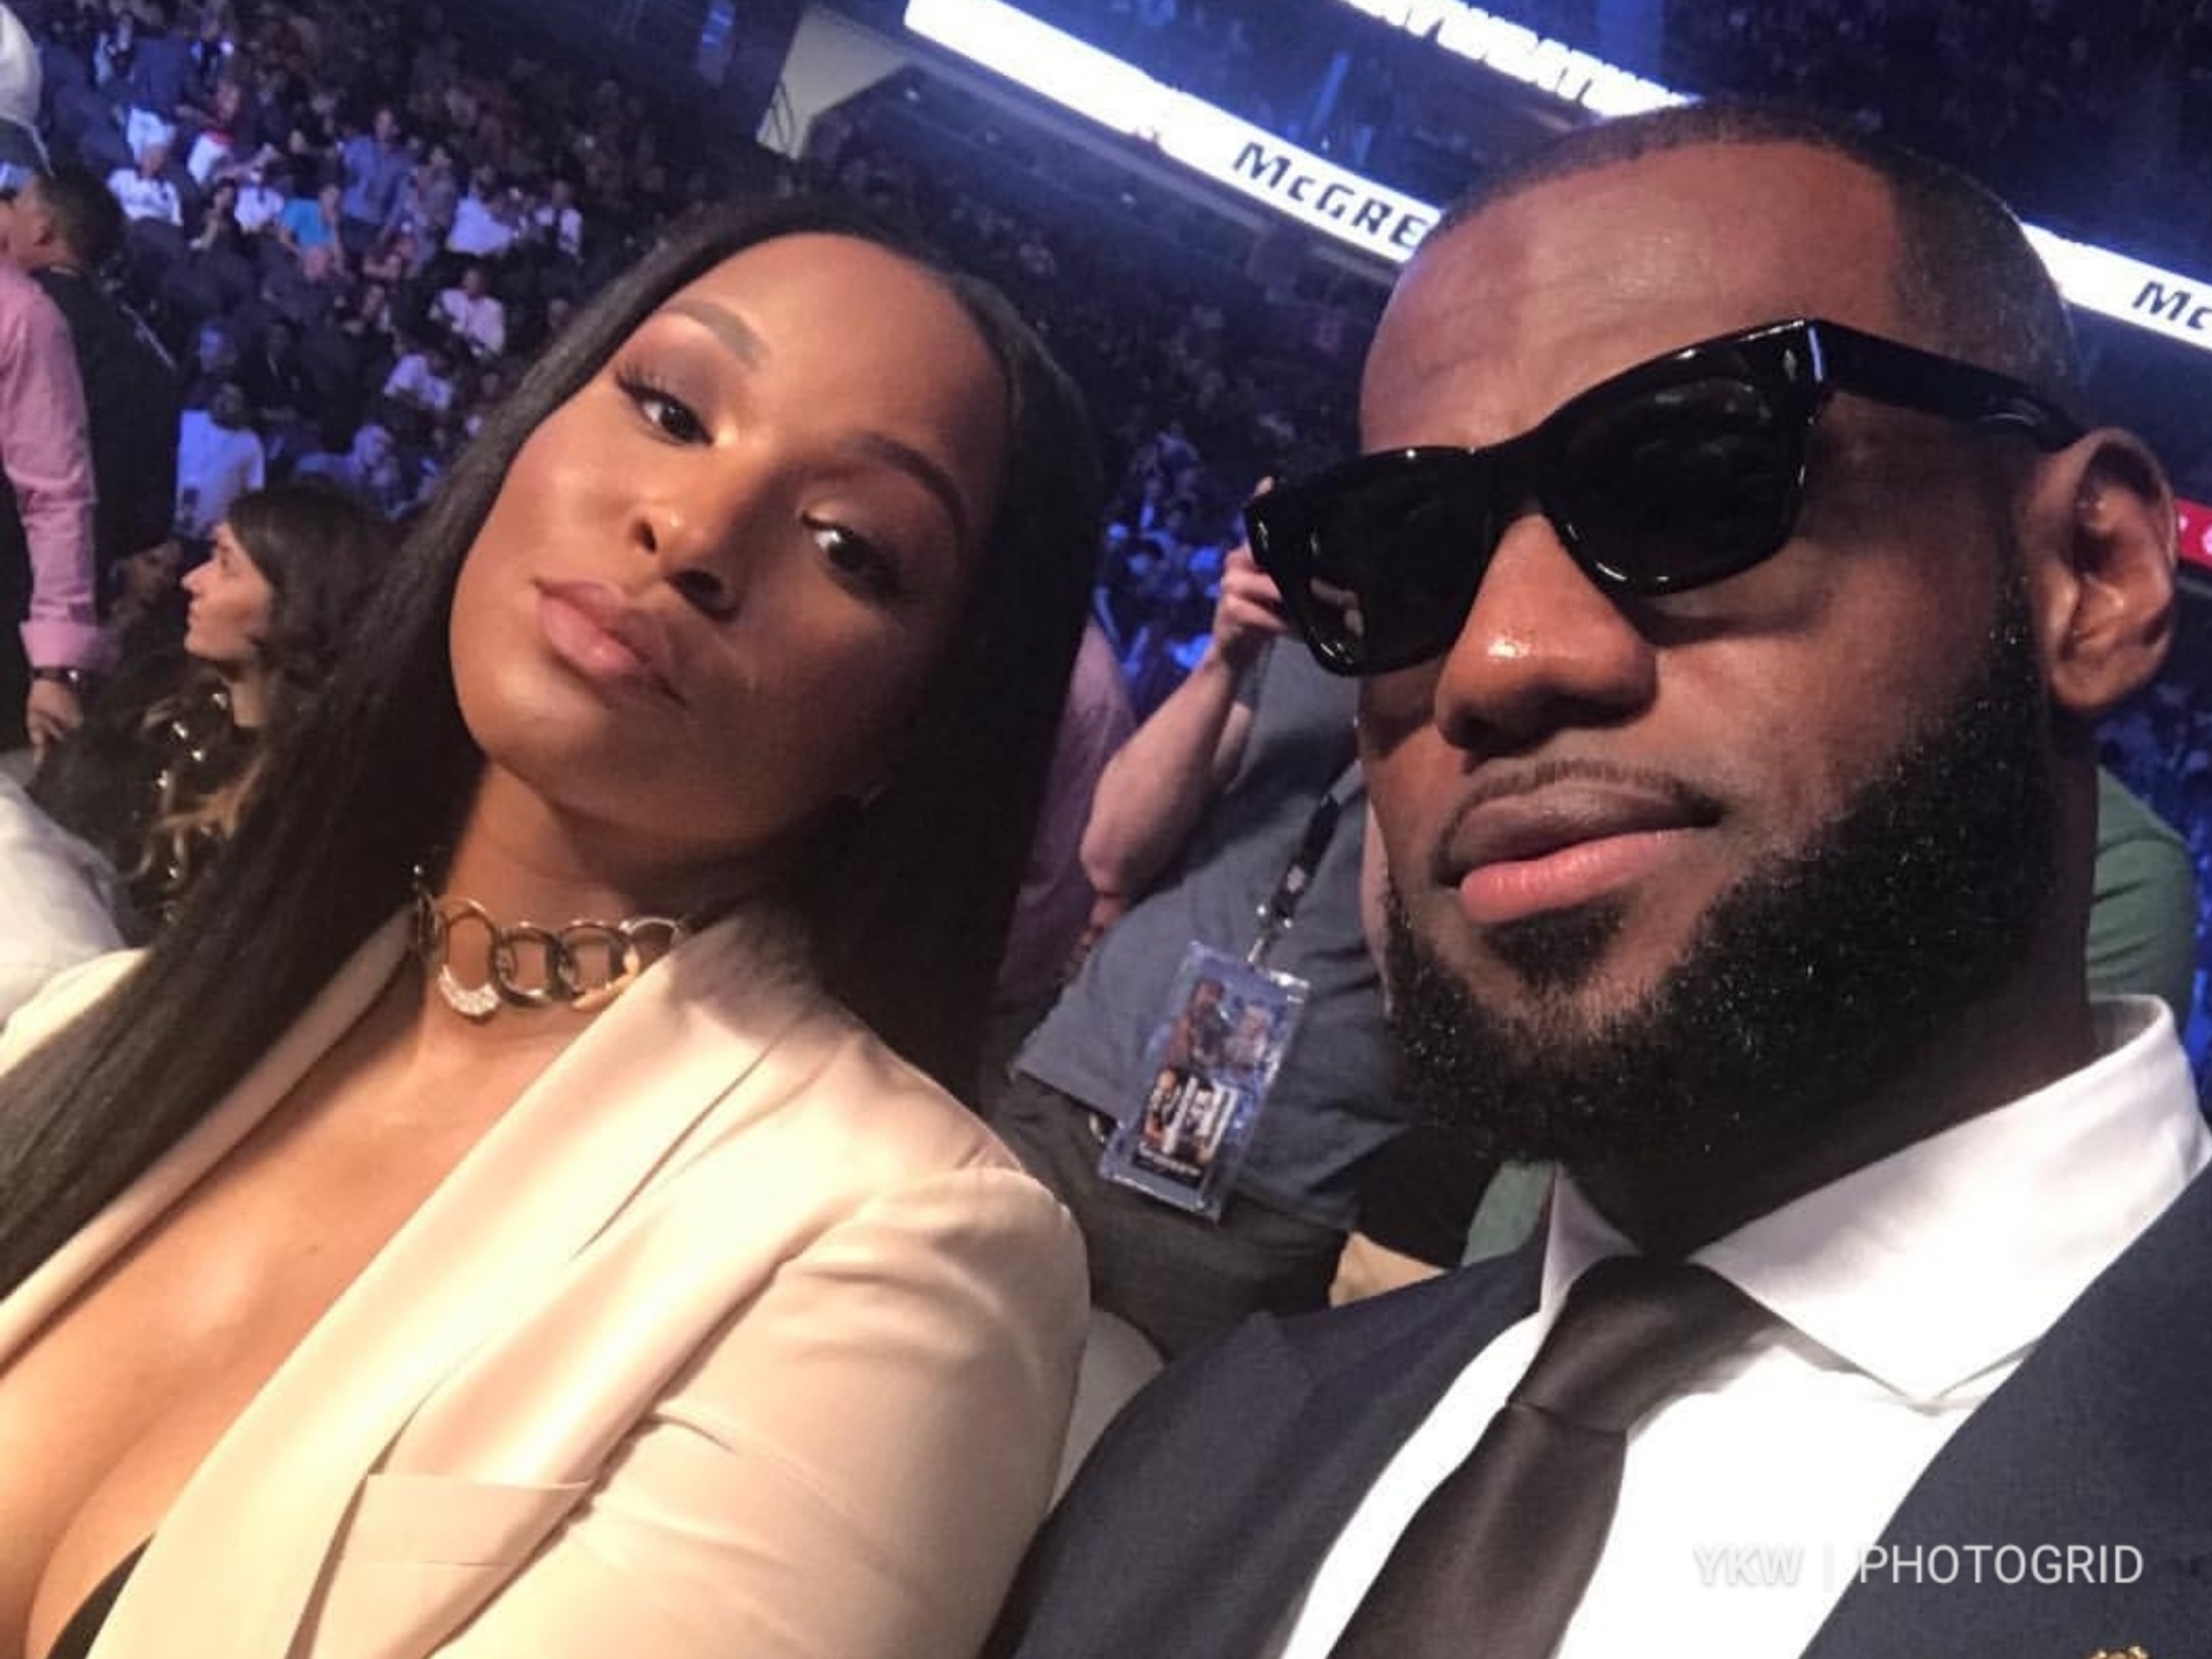 LeBron James: ‘Man I Love This Woman!!’ Wife Savannah Helps LeBron Recover After Camp By Rubbing His Feet